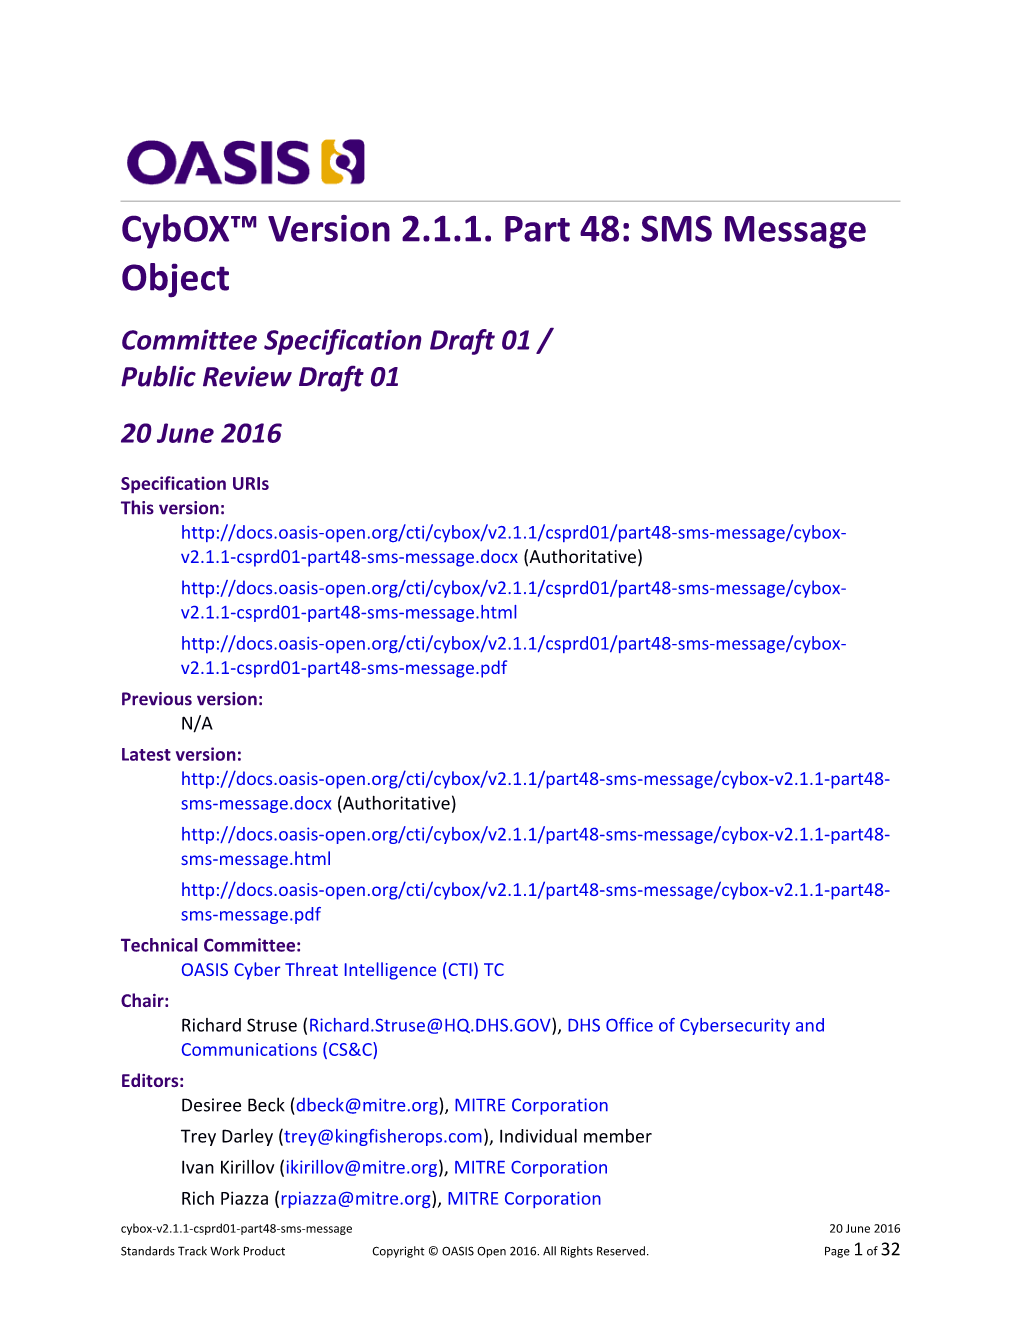 Cybox Version 2.1.1. Part 48: SMS Message Object